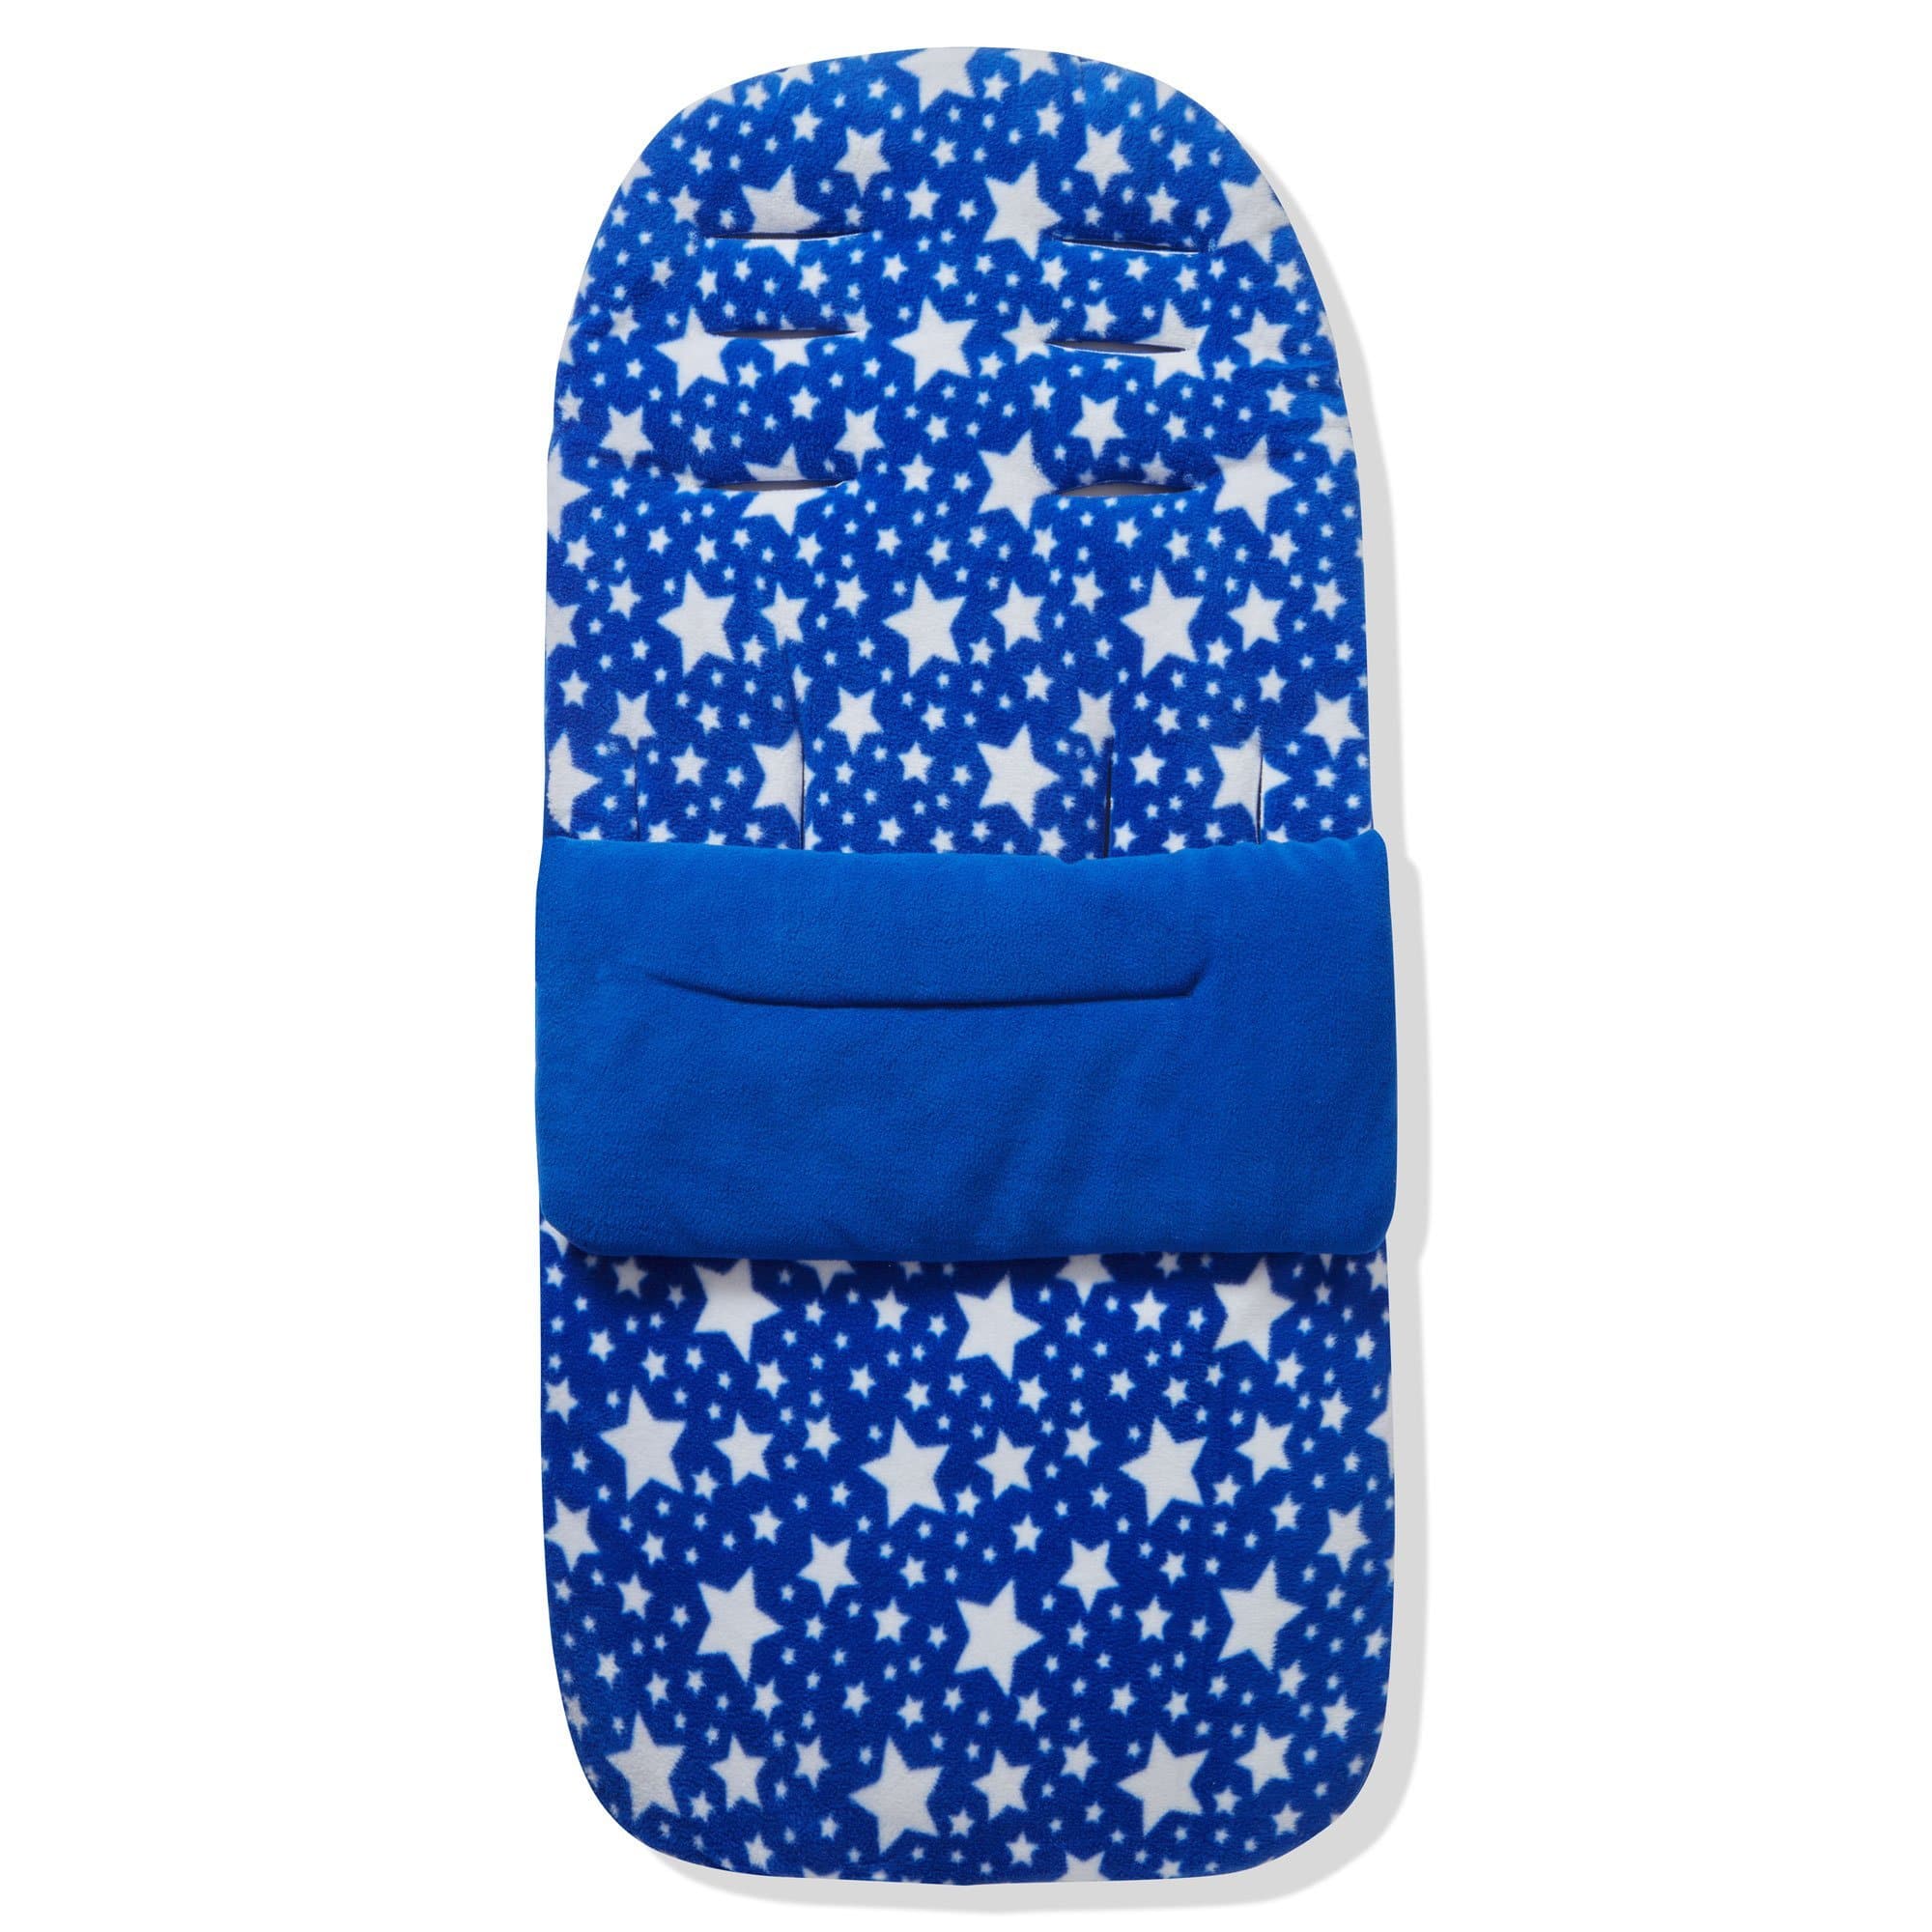 Fleece Footmuff / Cosy Toes Compatible with Hesba - Blue Star / Fits All Models | For Your Little One